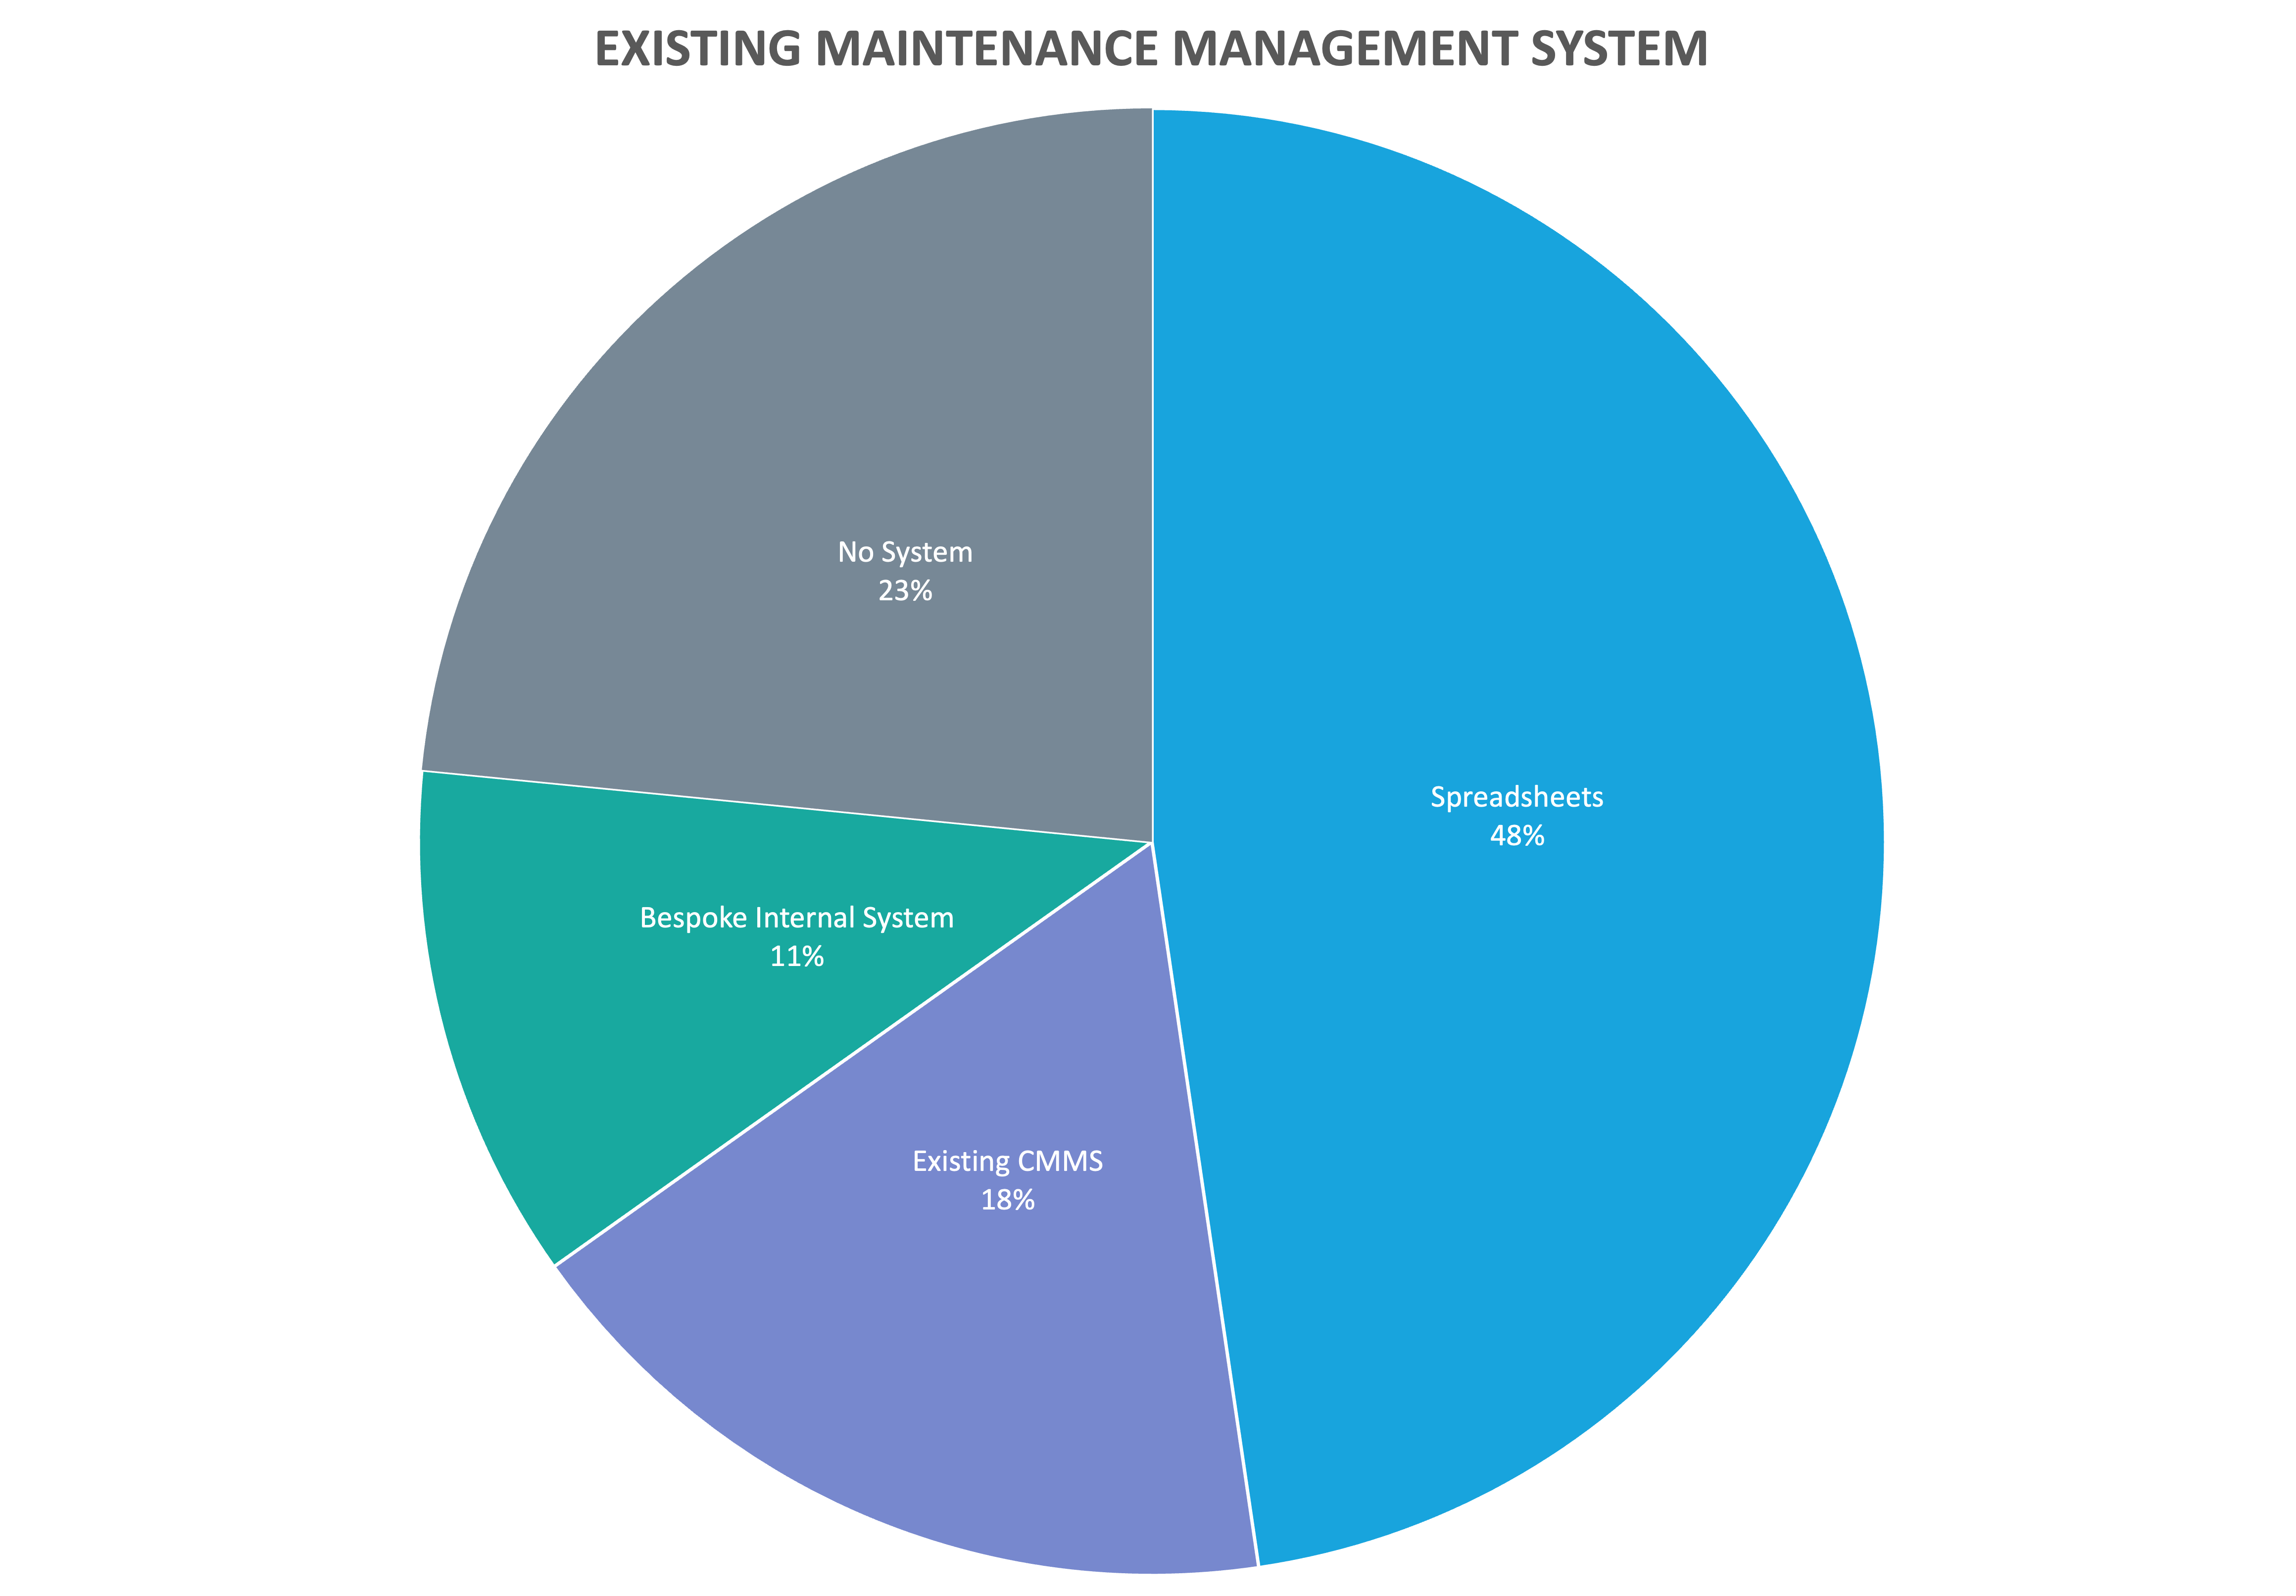 Existing Maintenance Management Systems